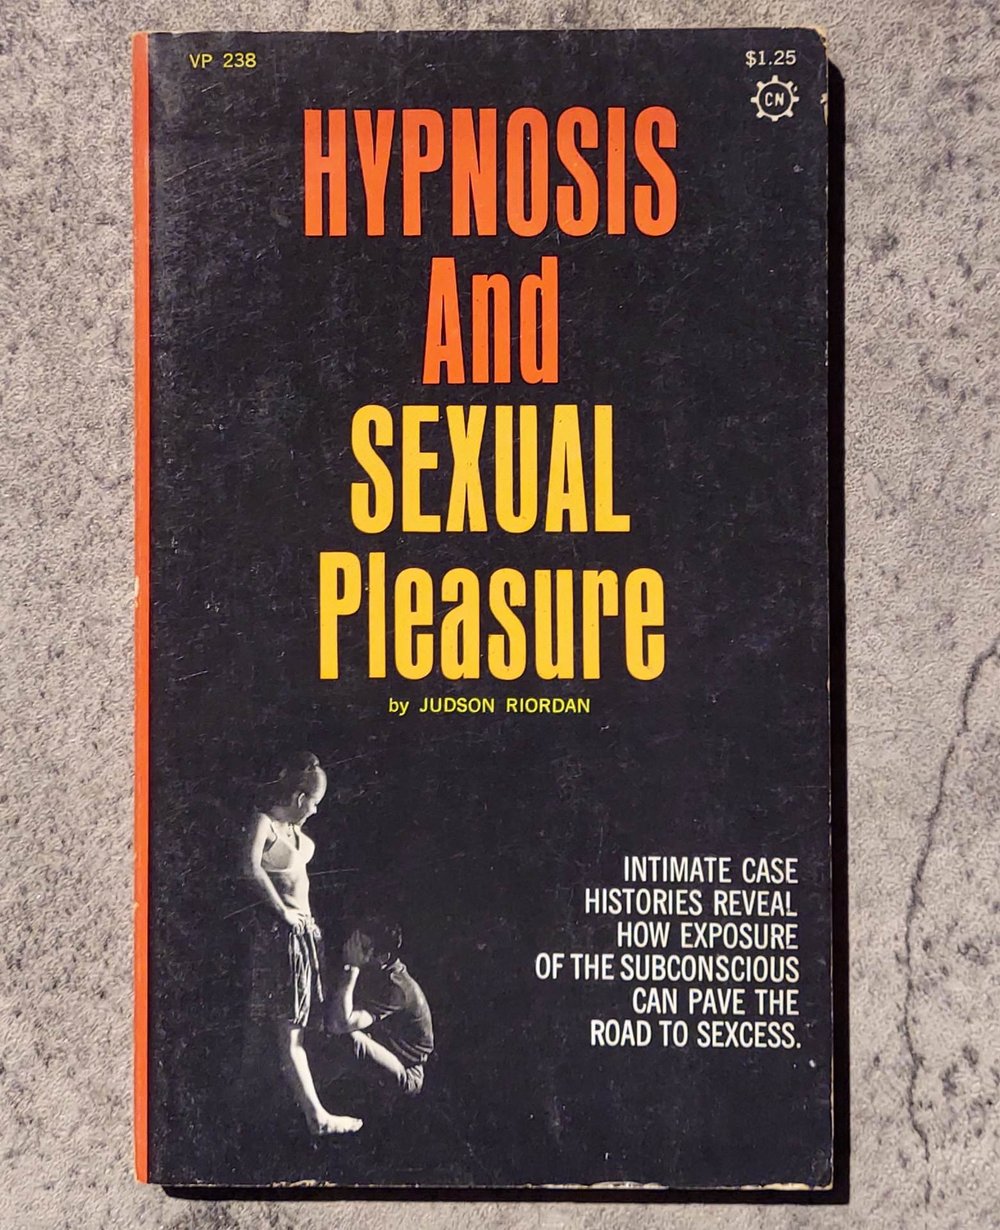 Hypnosis and Sexual Pleasure, by Judson Riordan